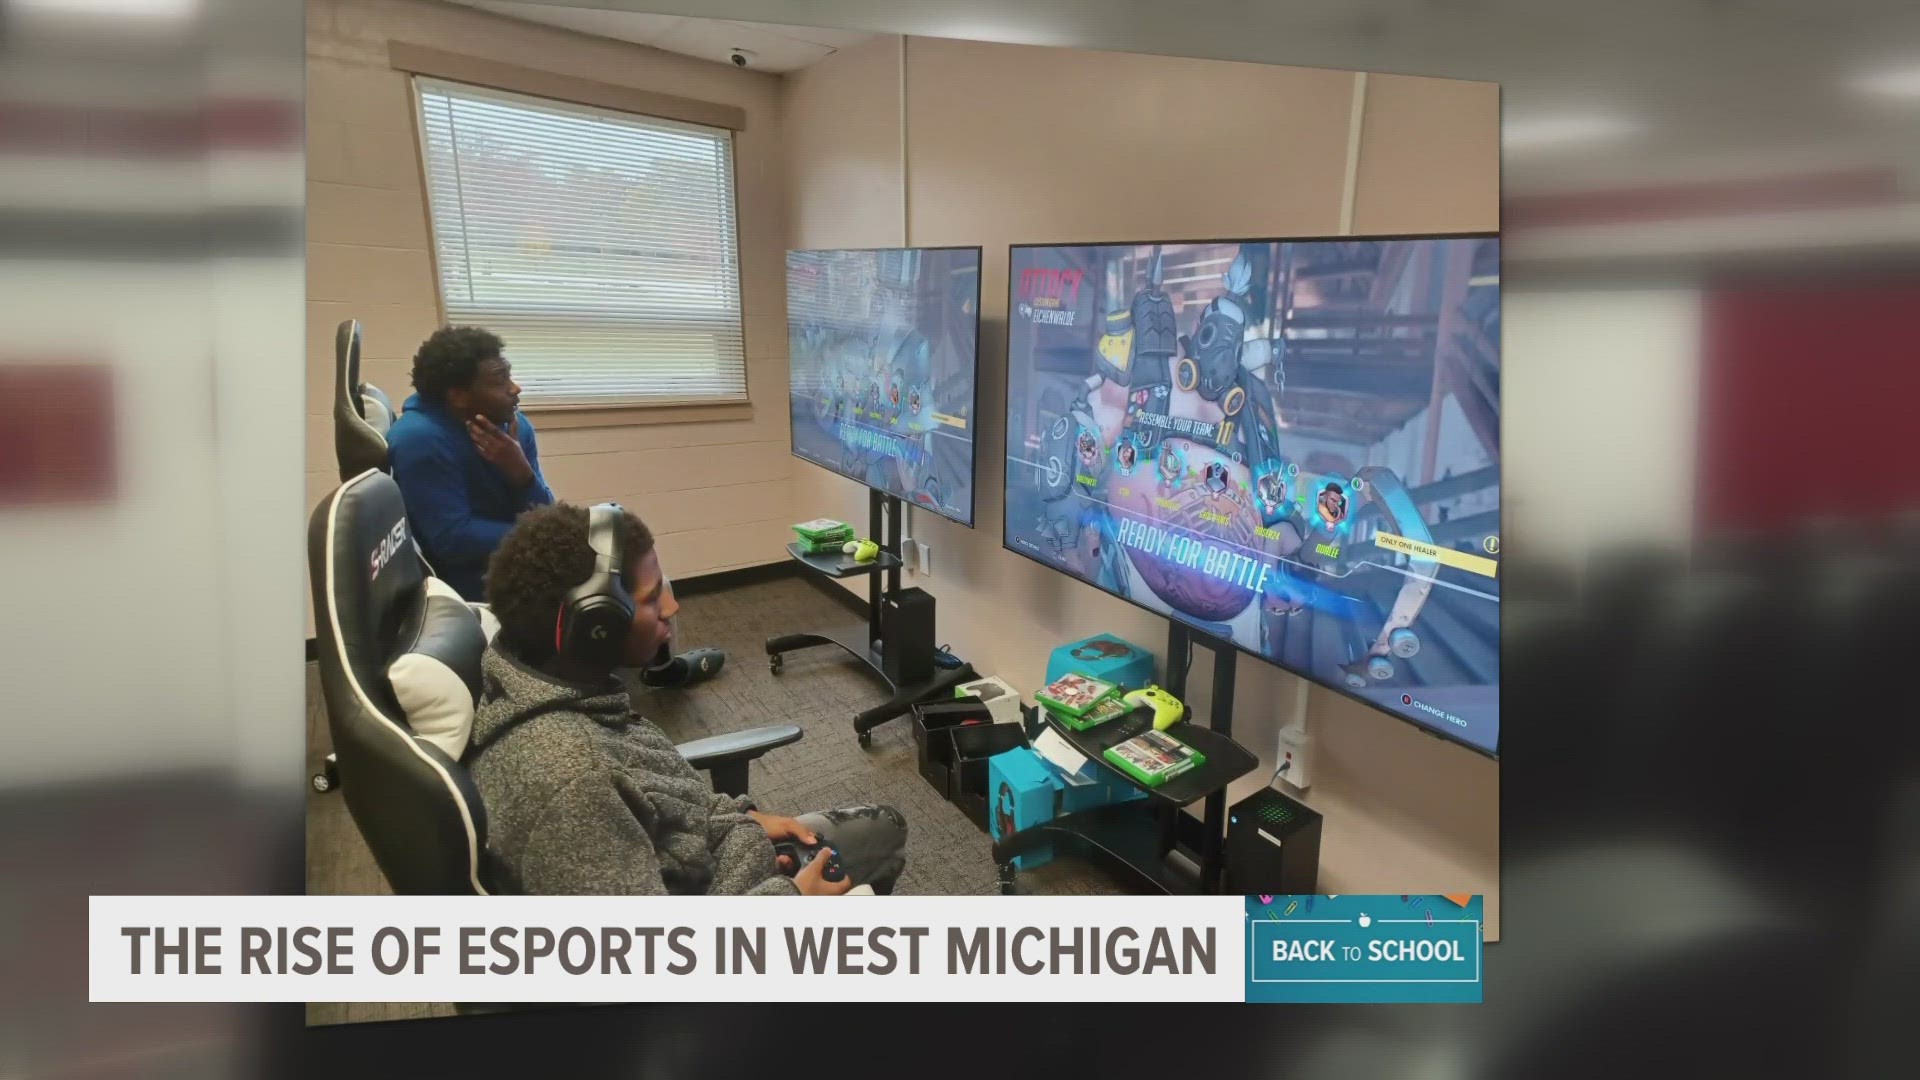 According to the Michigan High School Esports League last spring there were 400 teams at the high school level with about 1,400 kids participating across the state.